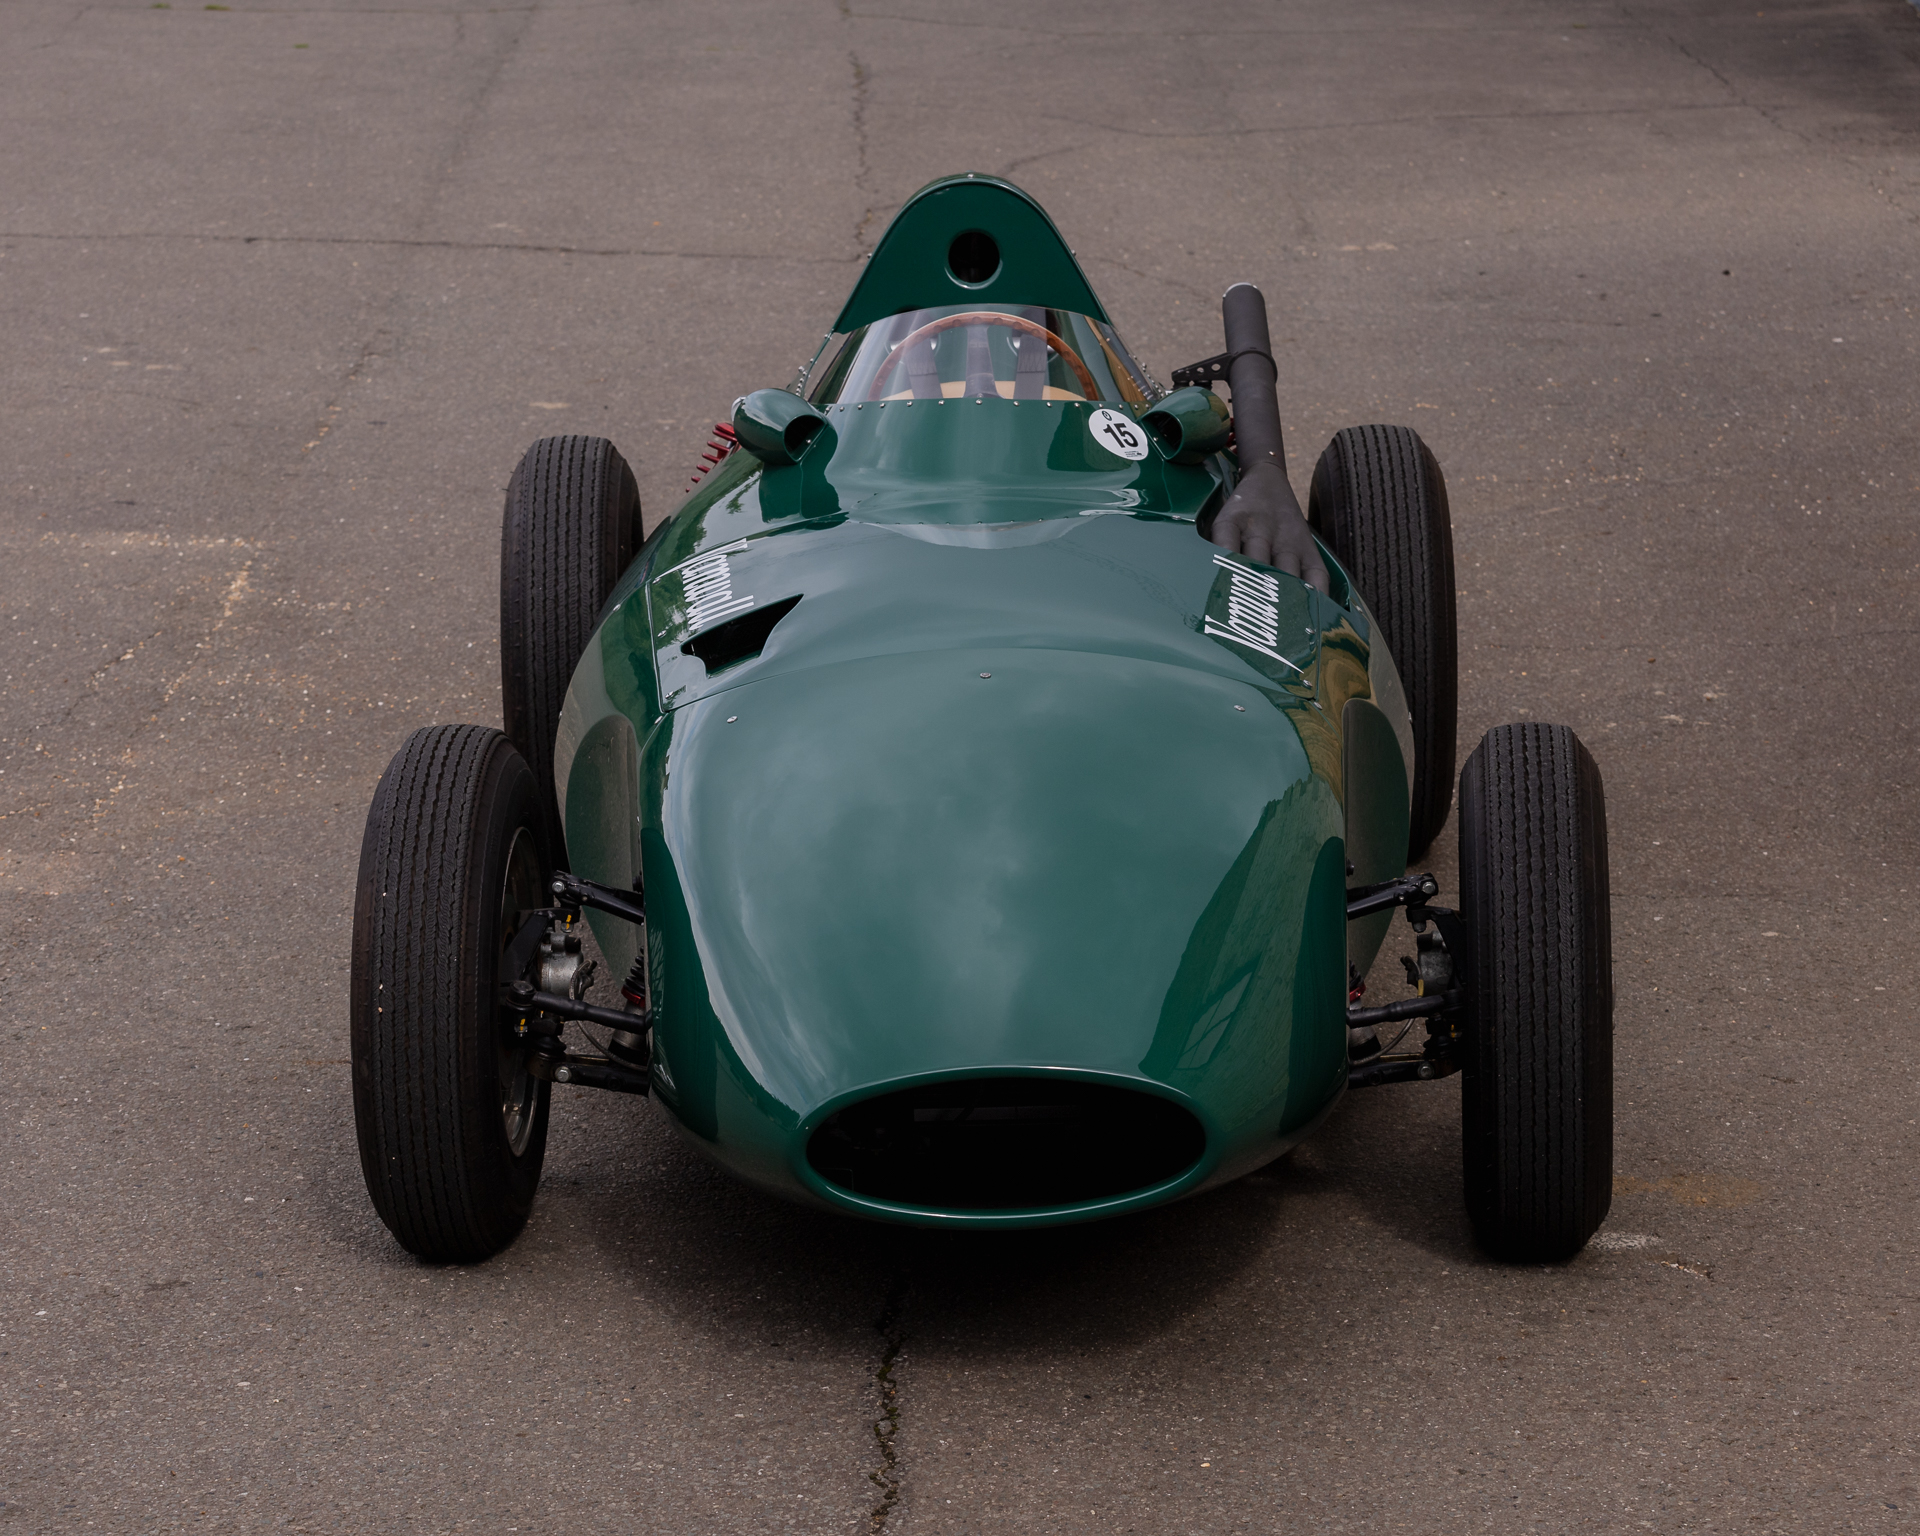 First Time On The Market: A Unique Vanwall